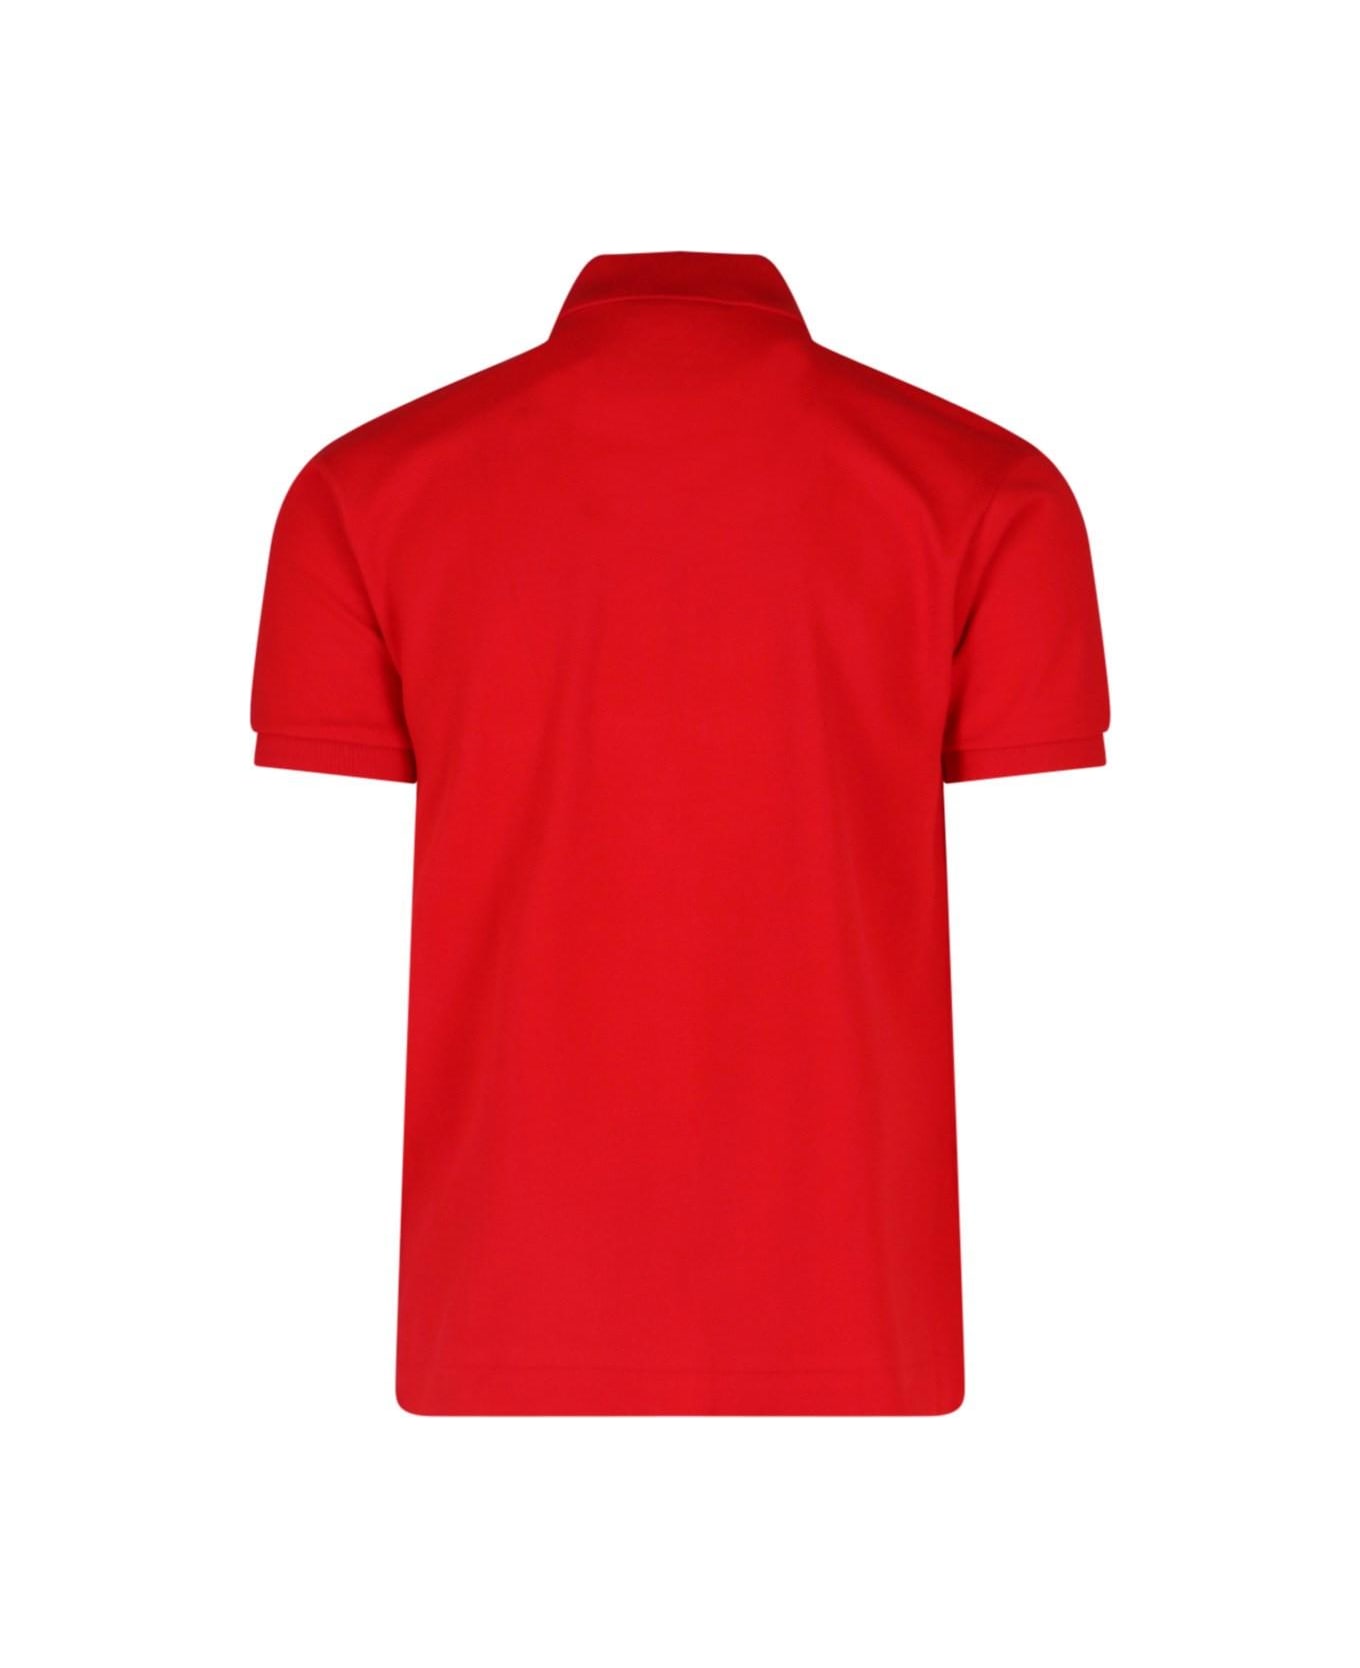 Lacoste 'l.12.12' Polo Shirt - Red